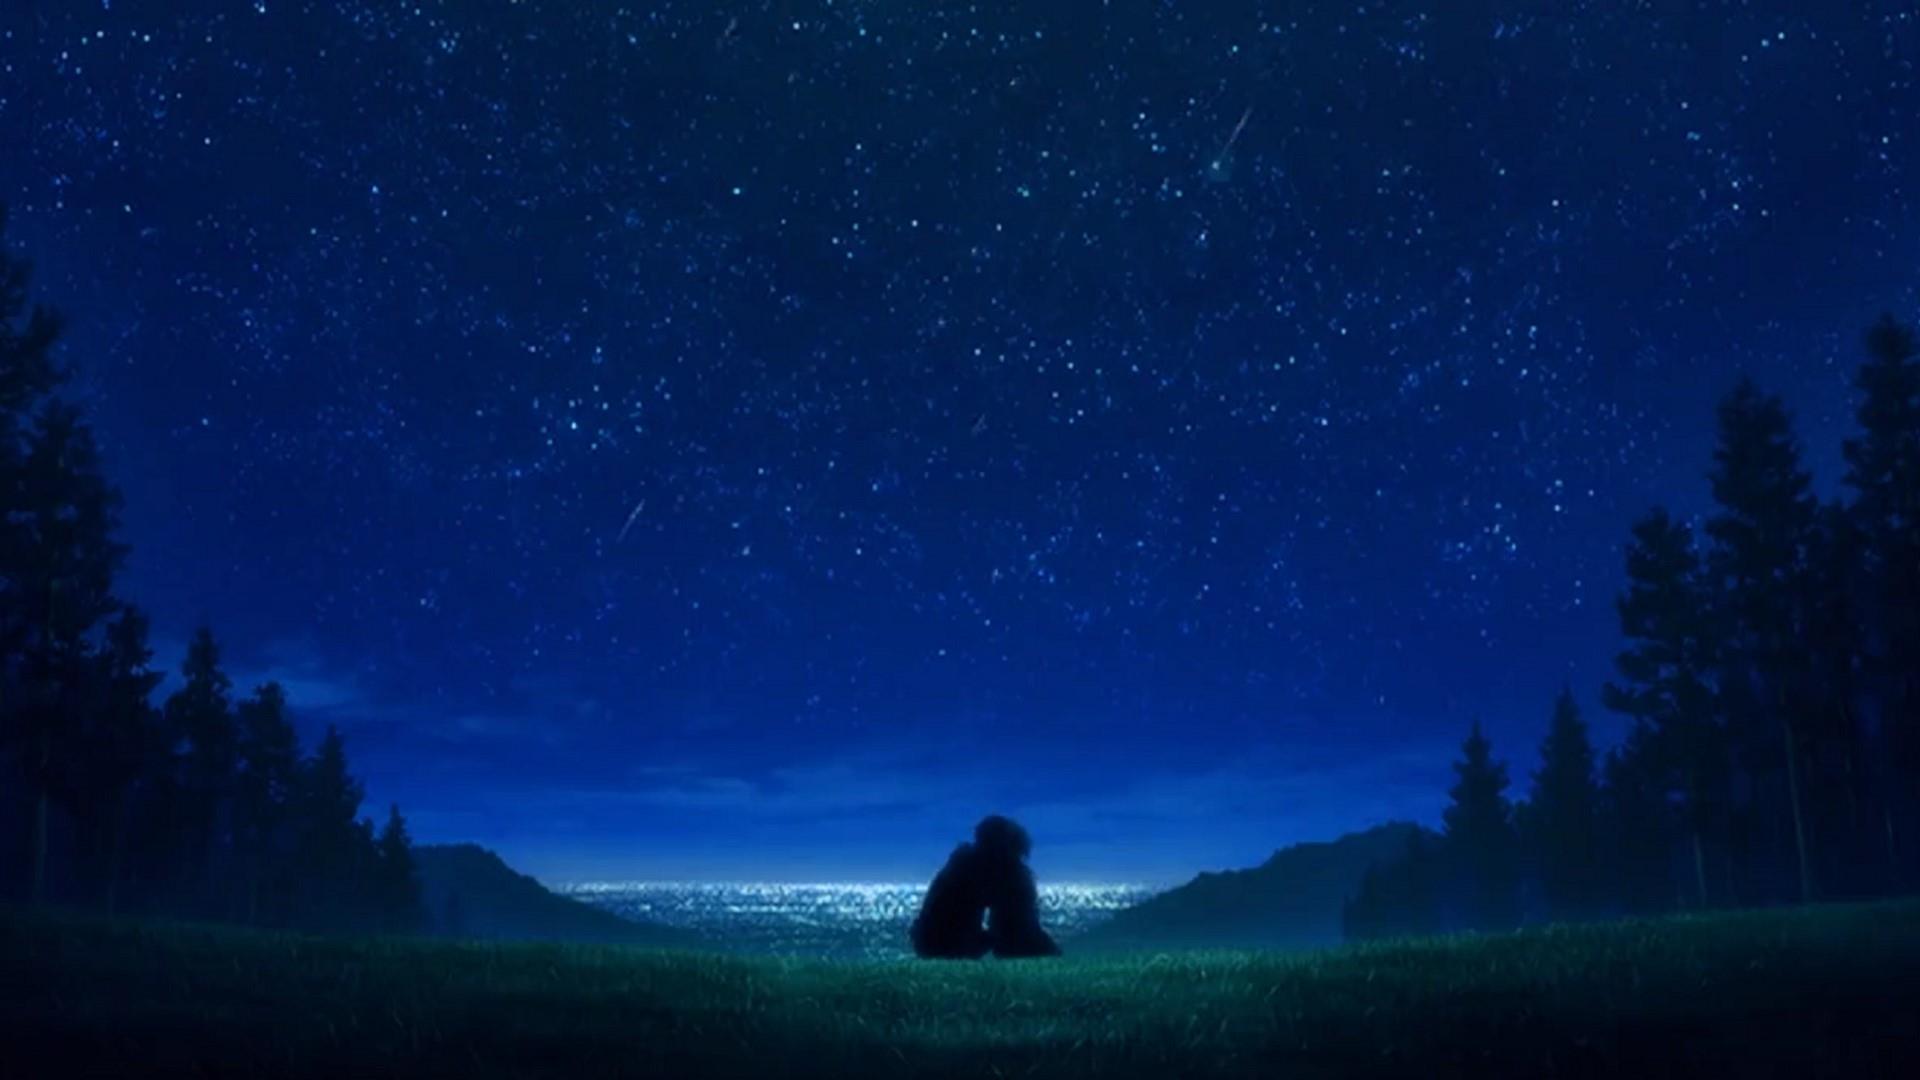 Anime Night Scenery Wallpapers